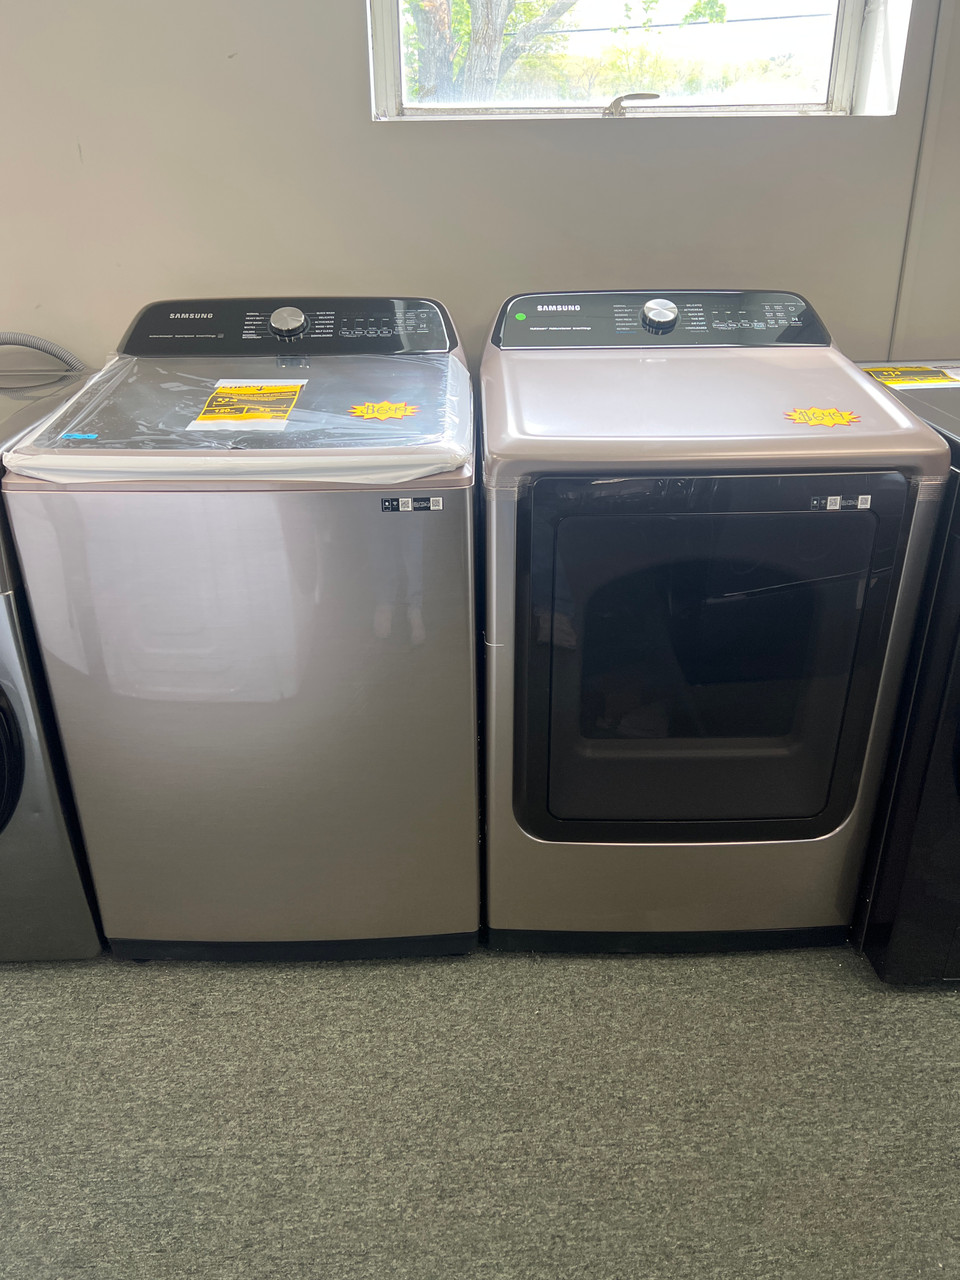 5.0 cu. ft. Extra Large Capacity Smart Front Load Washer with